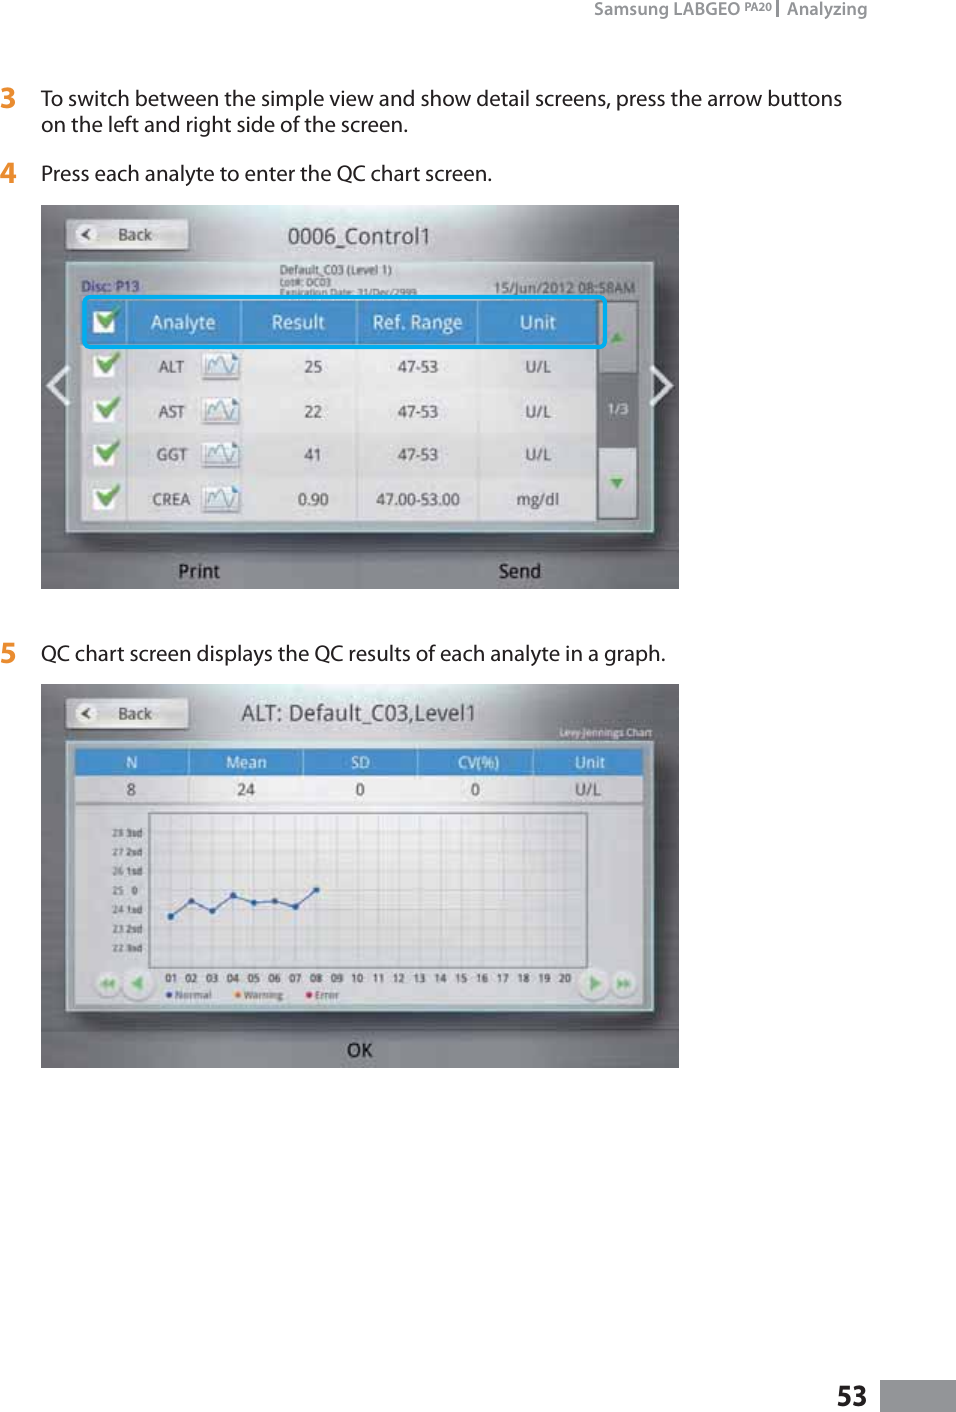 53Samsung LABGEO PA20   Analyzing3  To switch between the simple view and show detail screens, press the arrow buttons on the left and right side of the screen.4  Press each analyte to enter the QC chart screen. 5  QC chart screen displays the QC results of each analyte in a graph.